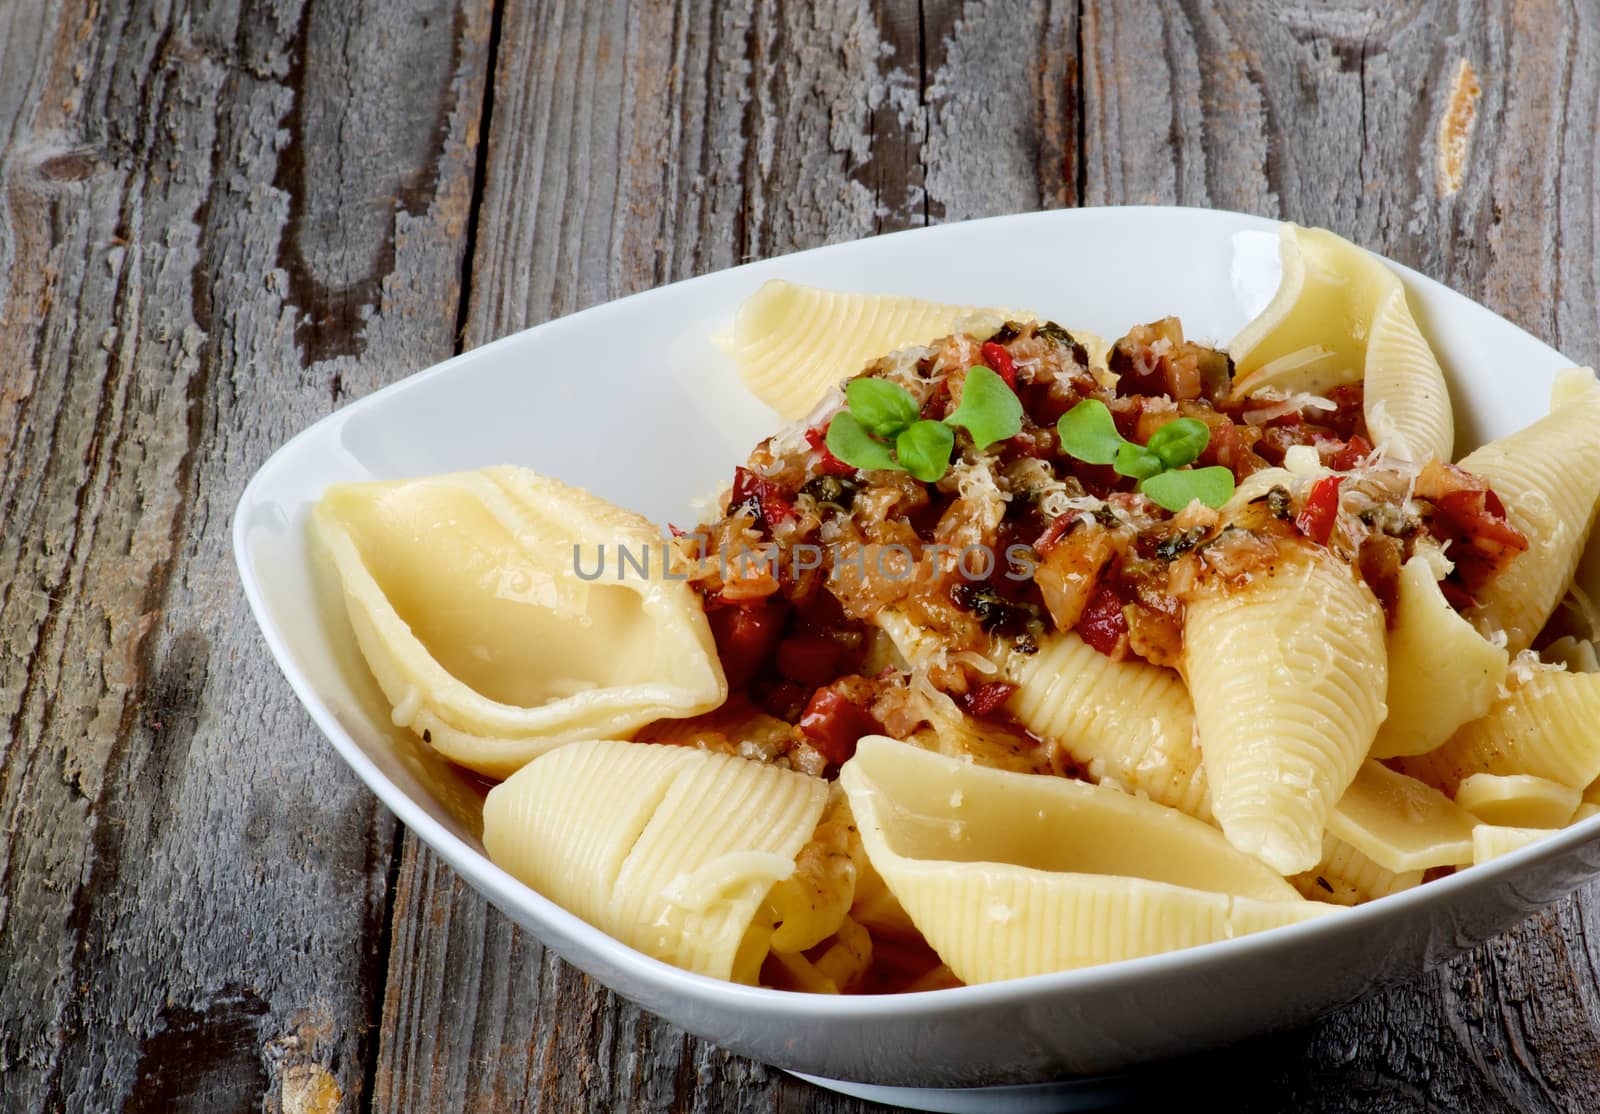 Delicious Conchiglie Giganti Pasta (Giant Pasta Shells) with Meat Sauce Bolognese in White Bowl closeup on Rustic Wooden background